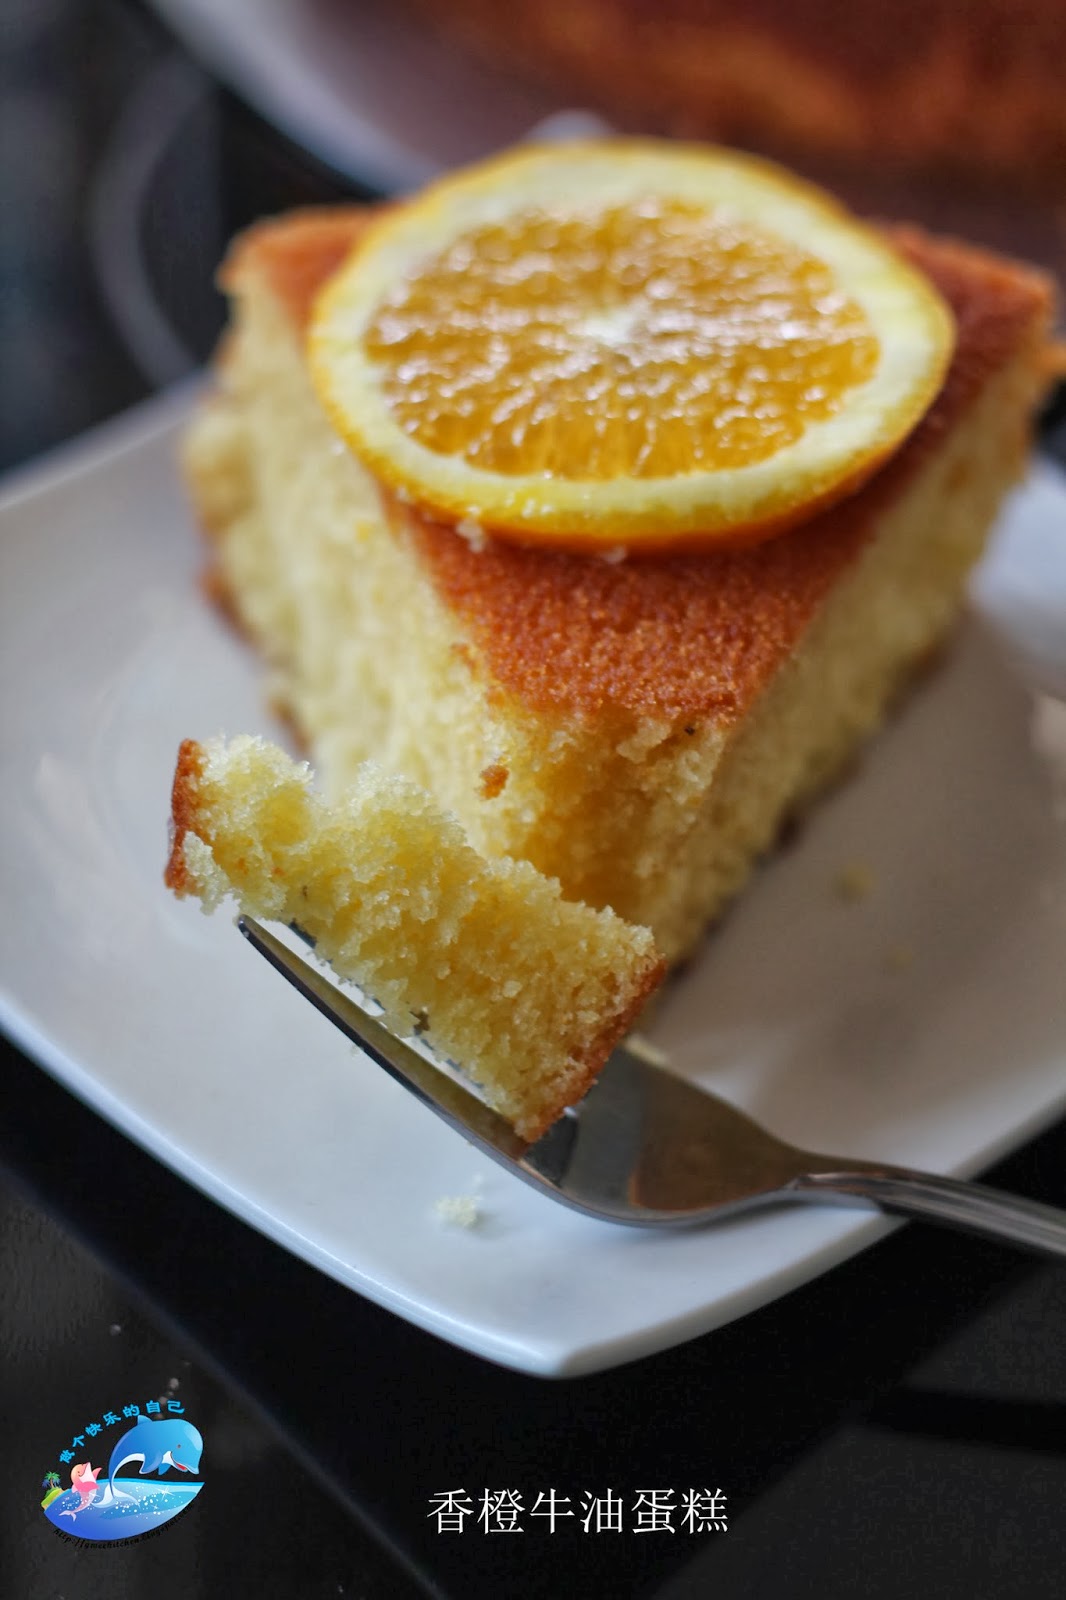 ZapPaLang: 传统牛油蛋糕 Old fashioned butter cake